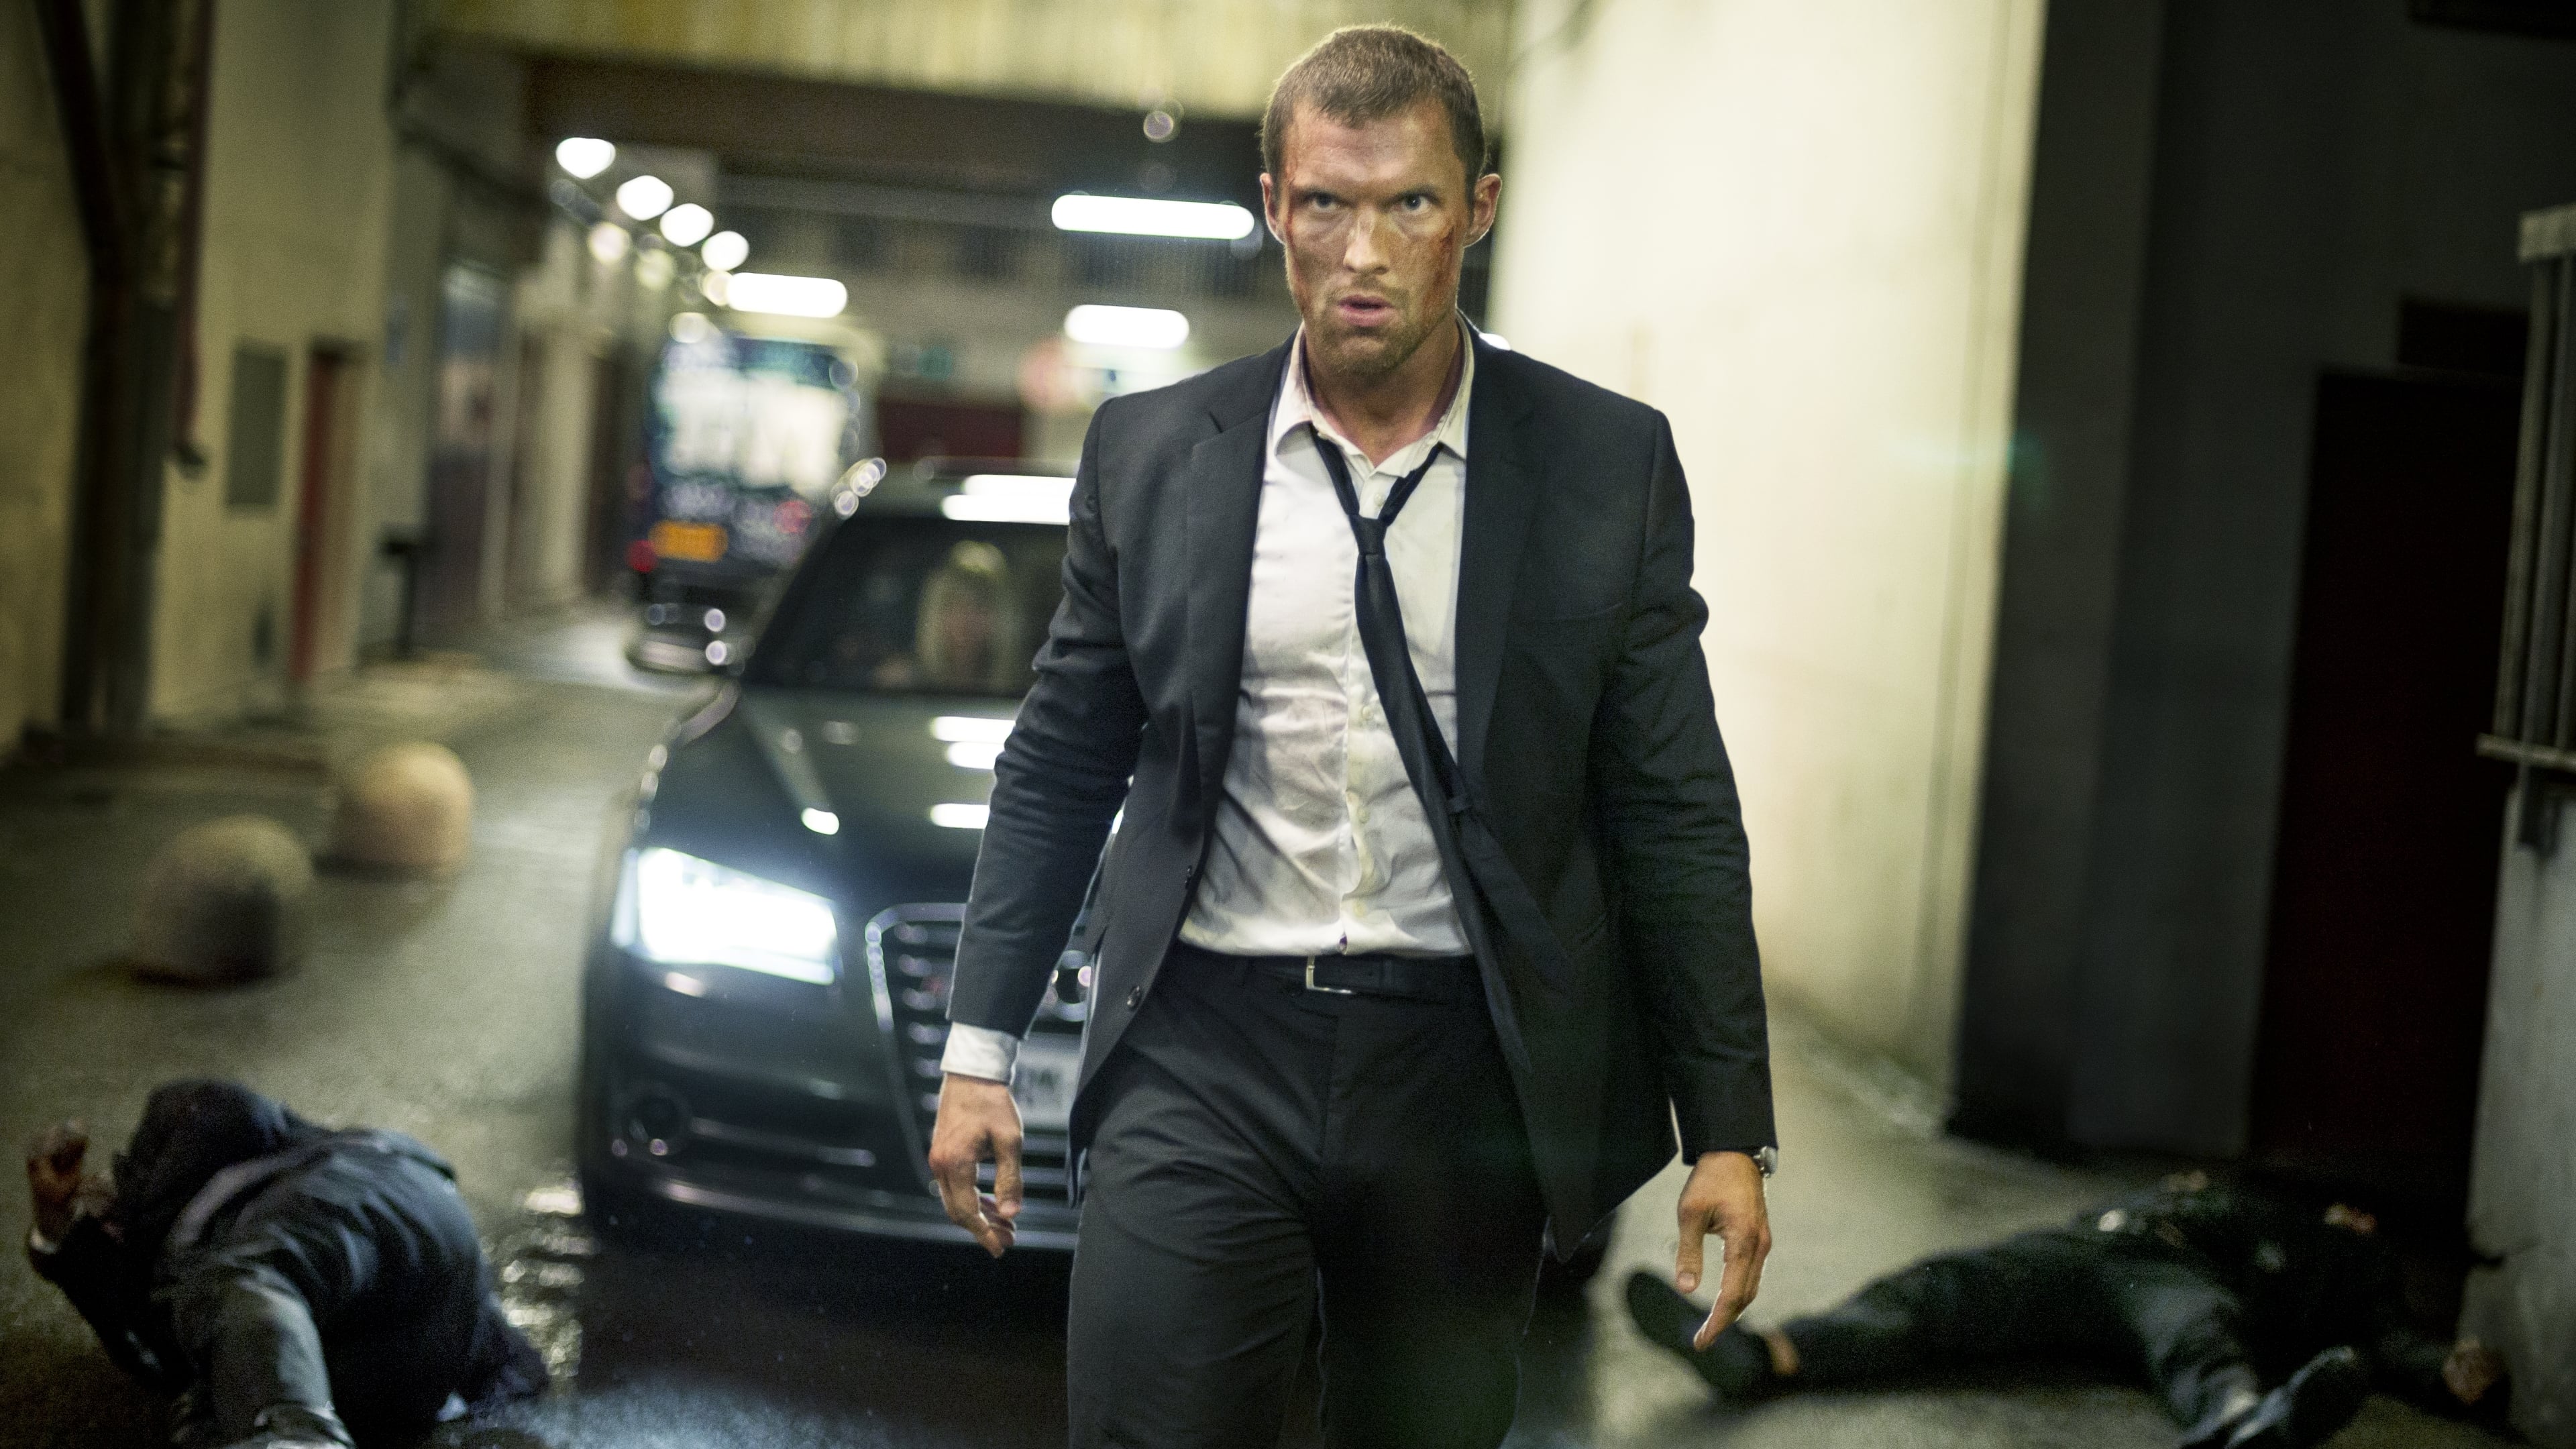 The Transporter Refueled (2015)